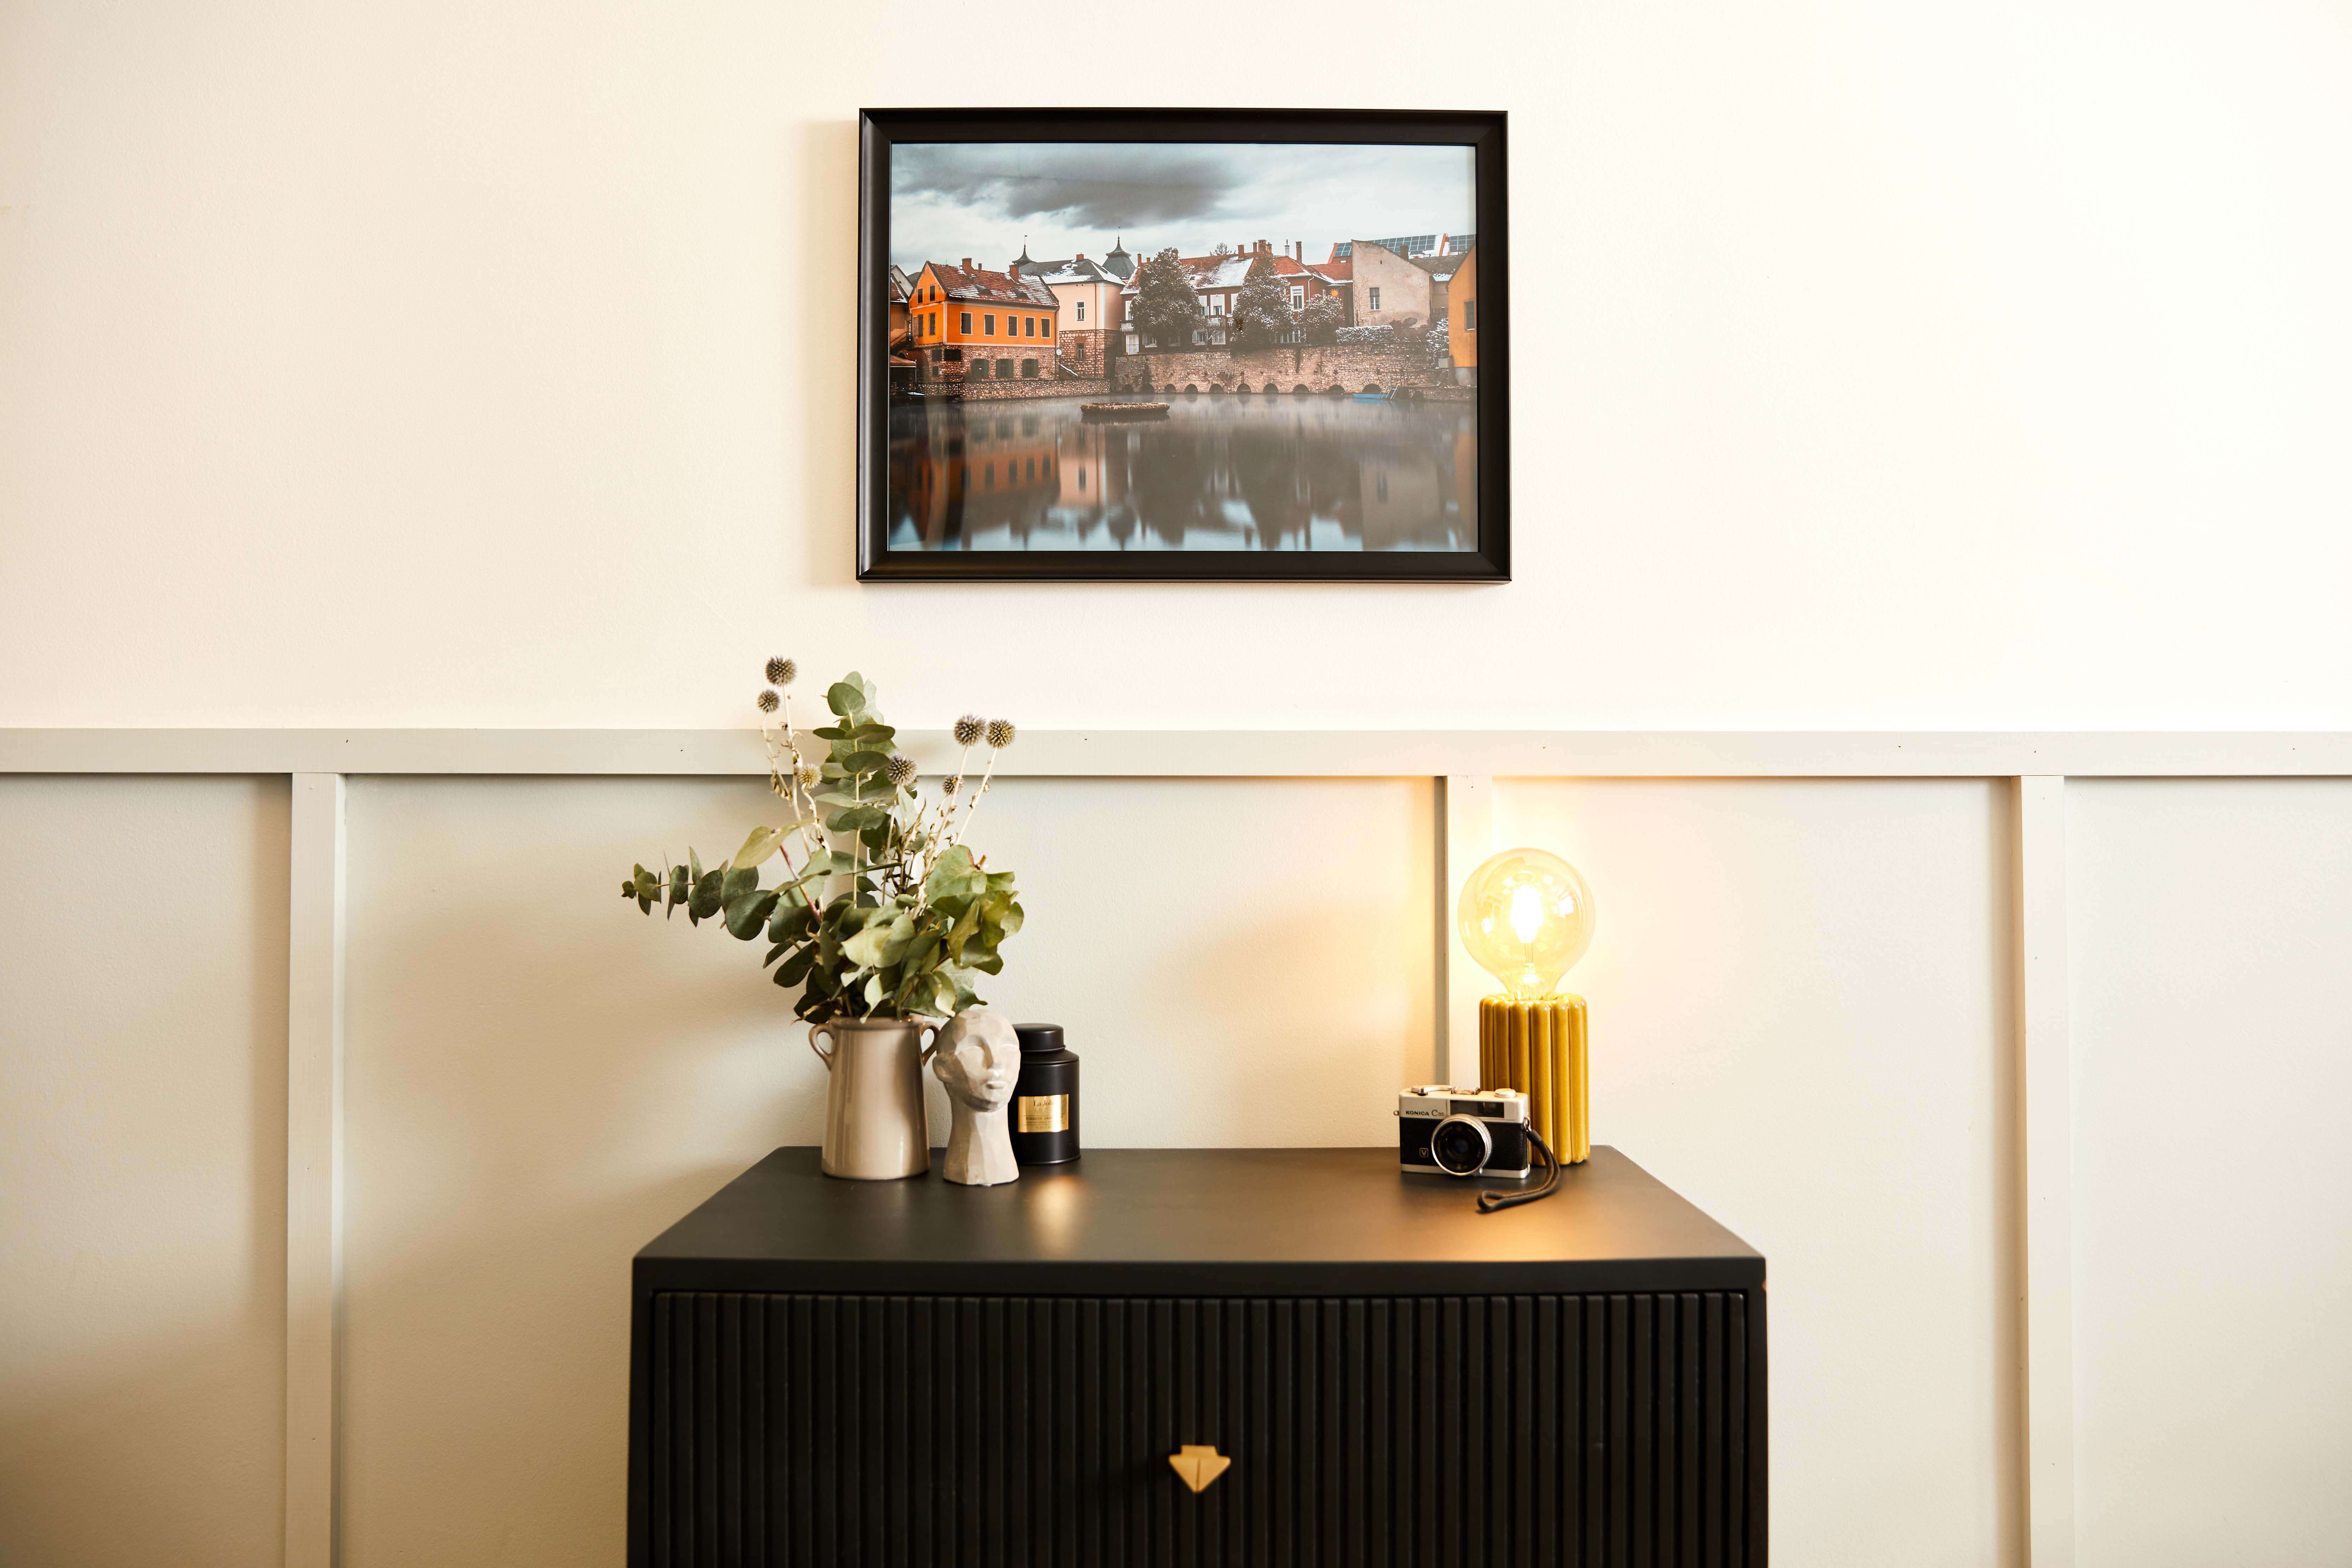 A handmade affordable canvas print in a made to order classic black frame displayed in home